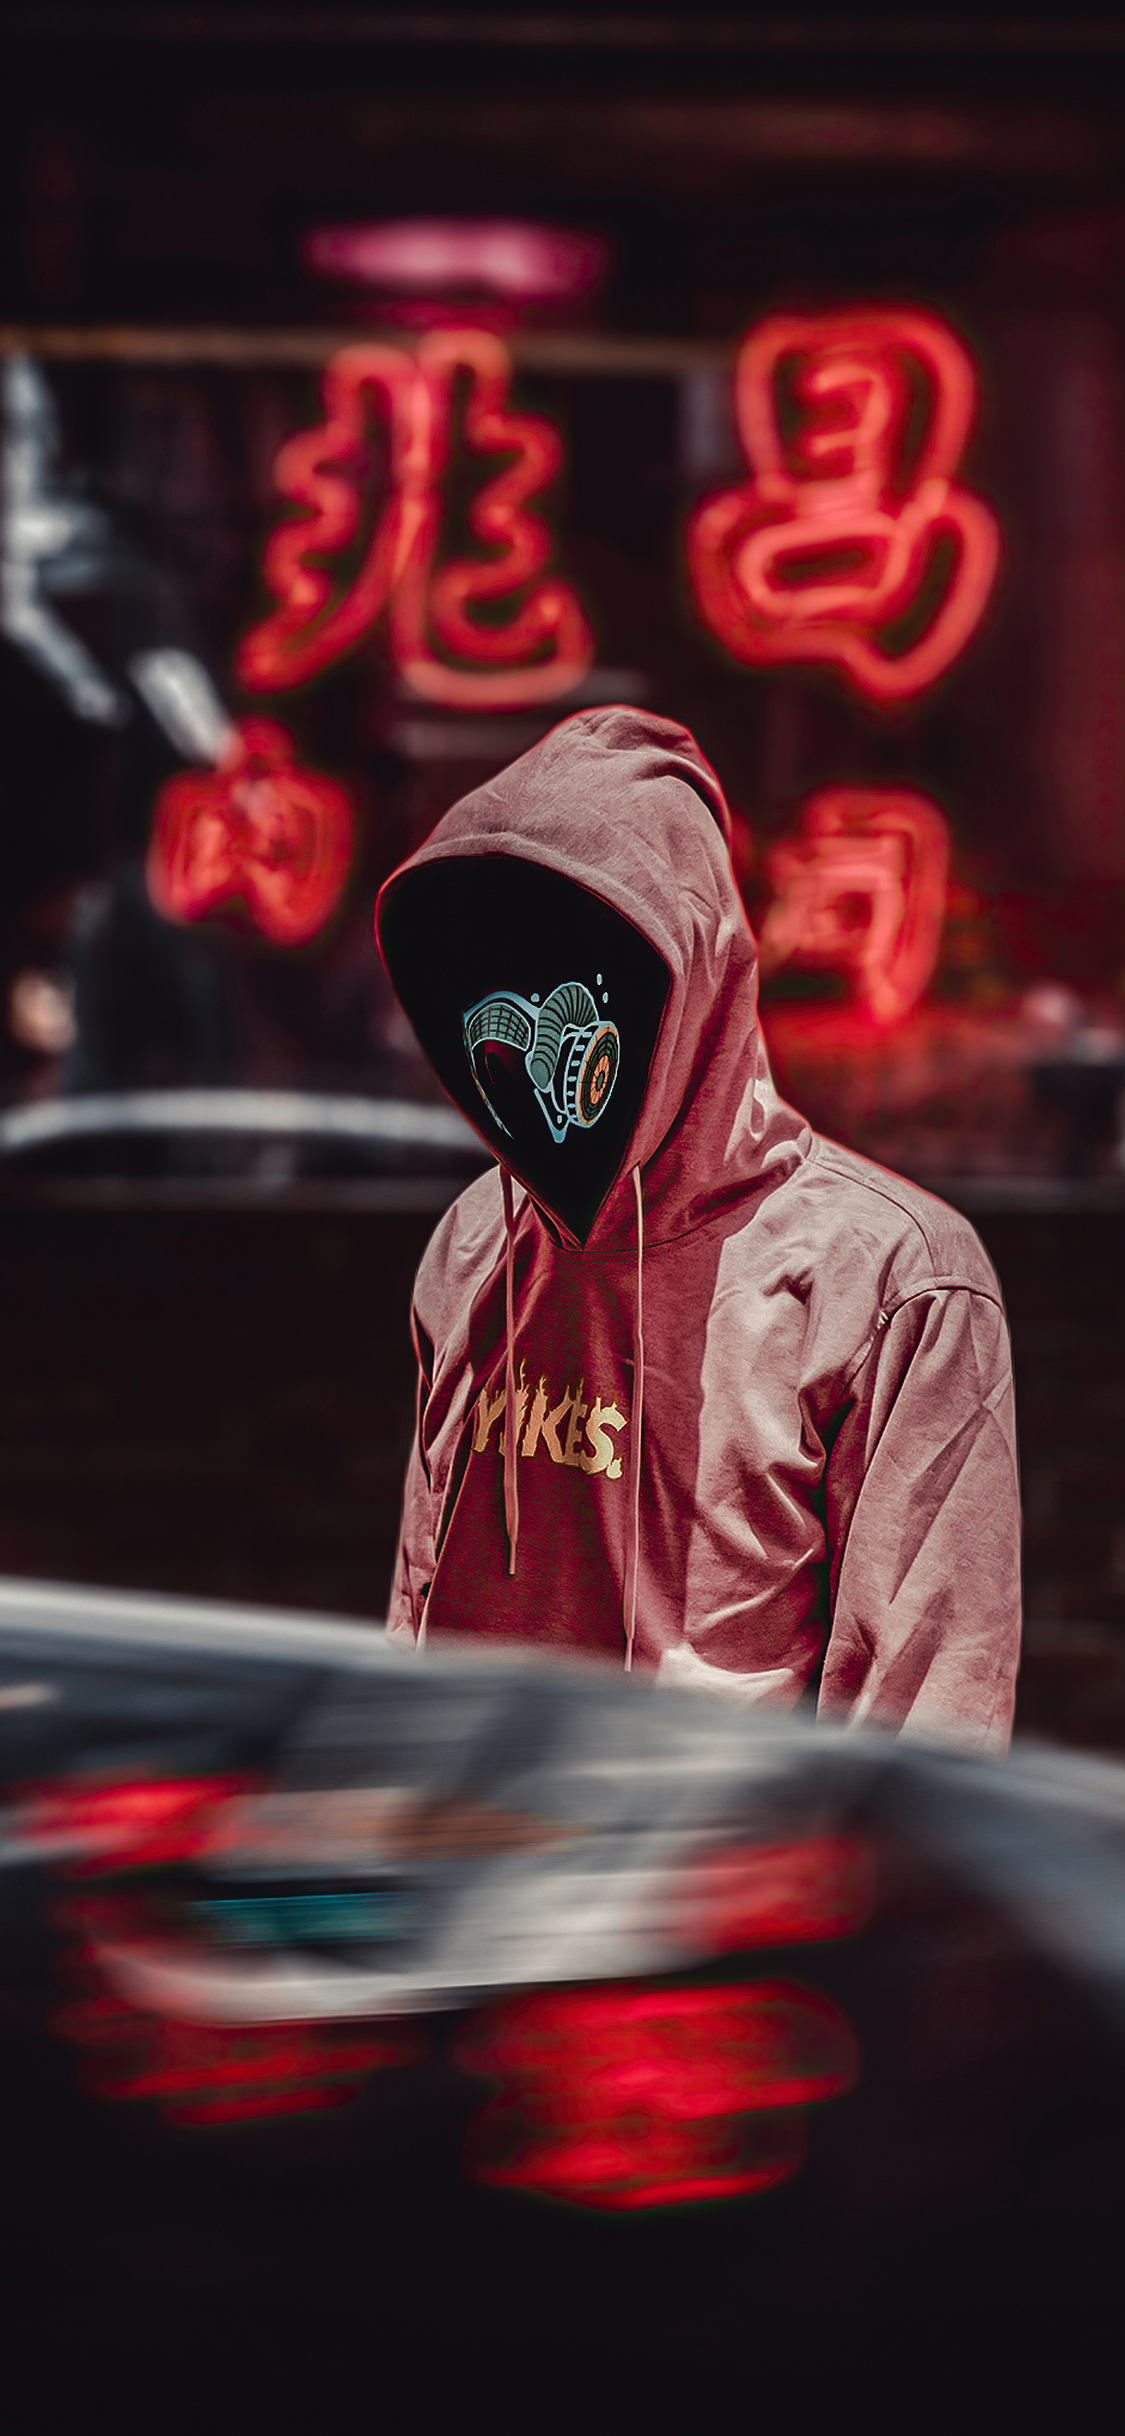 Hoodie Guy 4k iPhone XS, iPhone iPhone X HD 4k Wallpaper, Image, Background, Photo and Picture